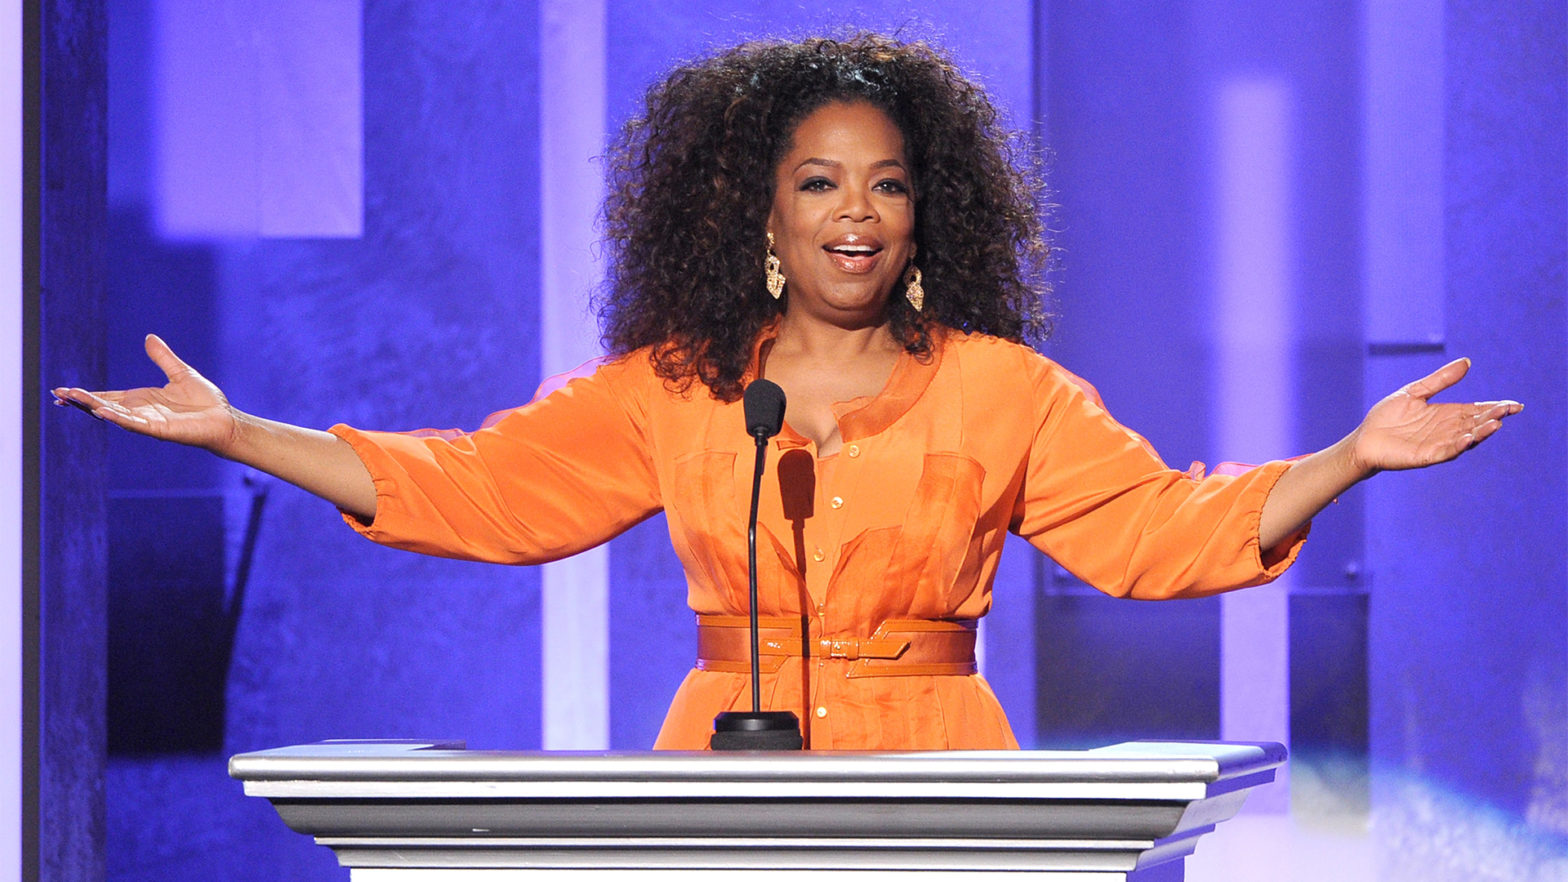 Yes, Oprah Is The Richest Black Woman In The World — But How'd She Amass Her $2.6B Fortune?